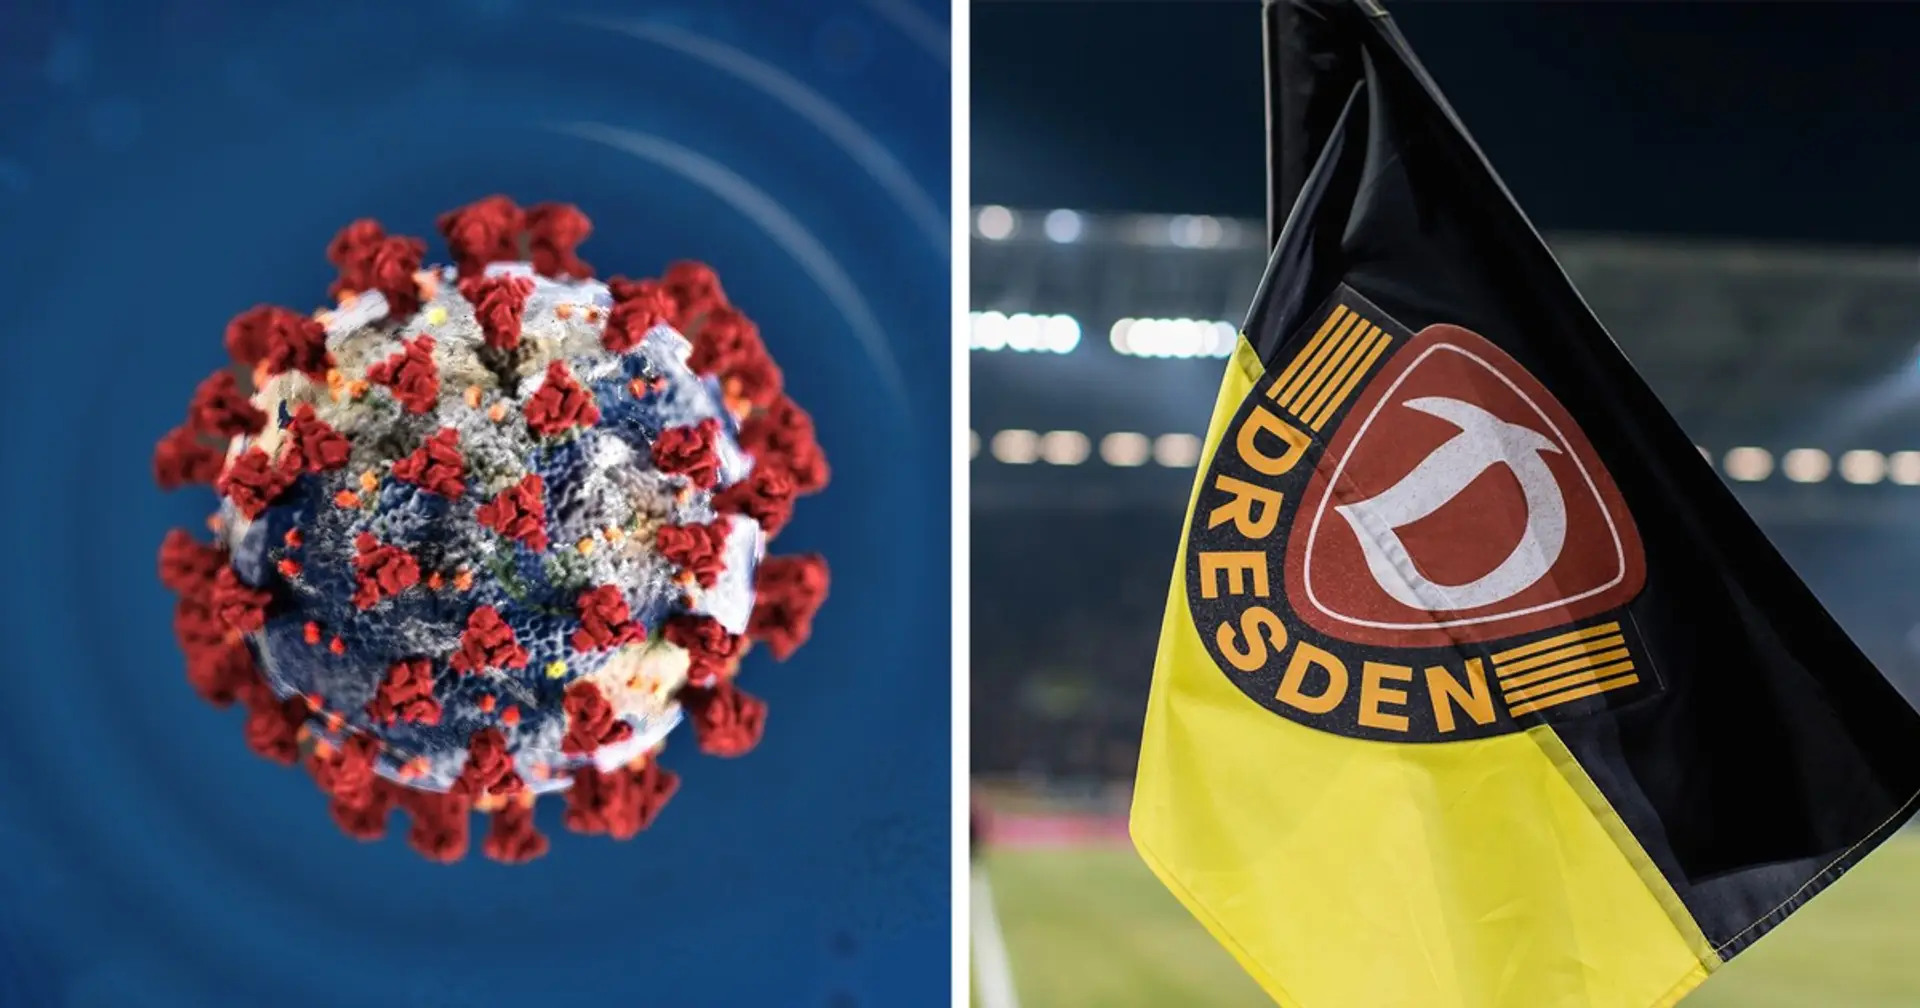 German football may be further postponed after Bundesliga 2 side forced to isolate as 2 players test positive for coronavirus